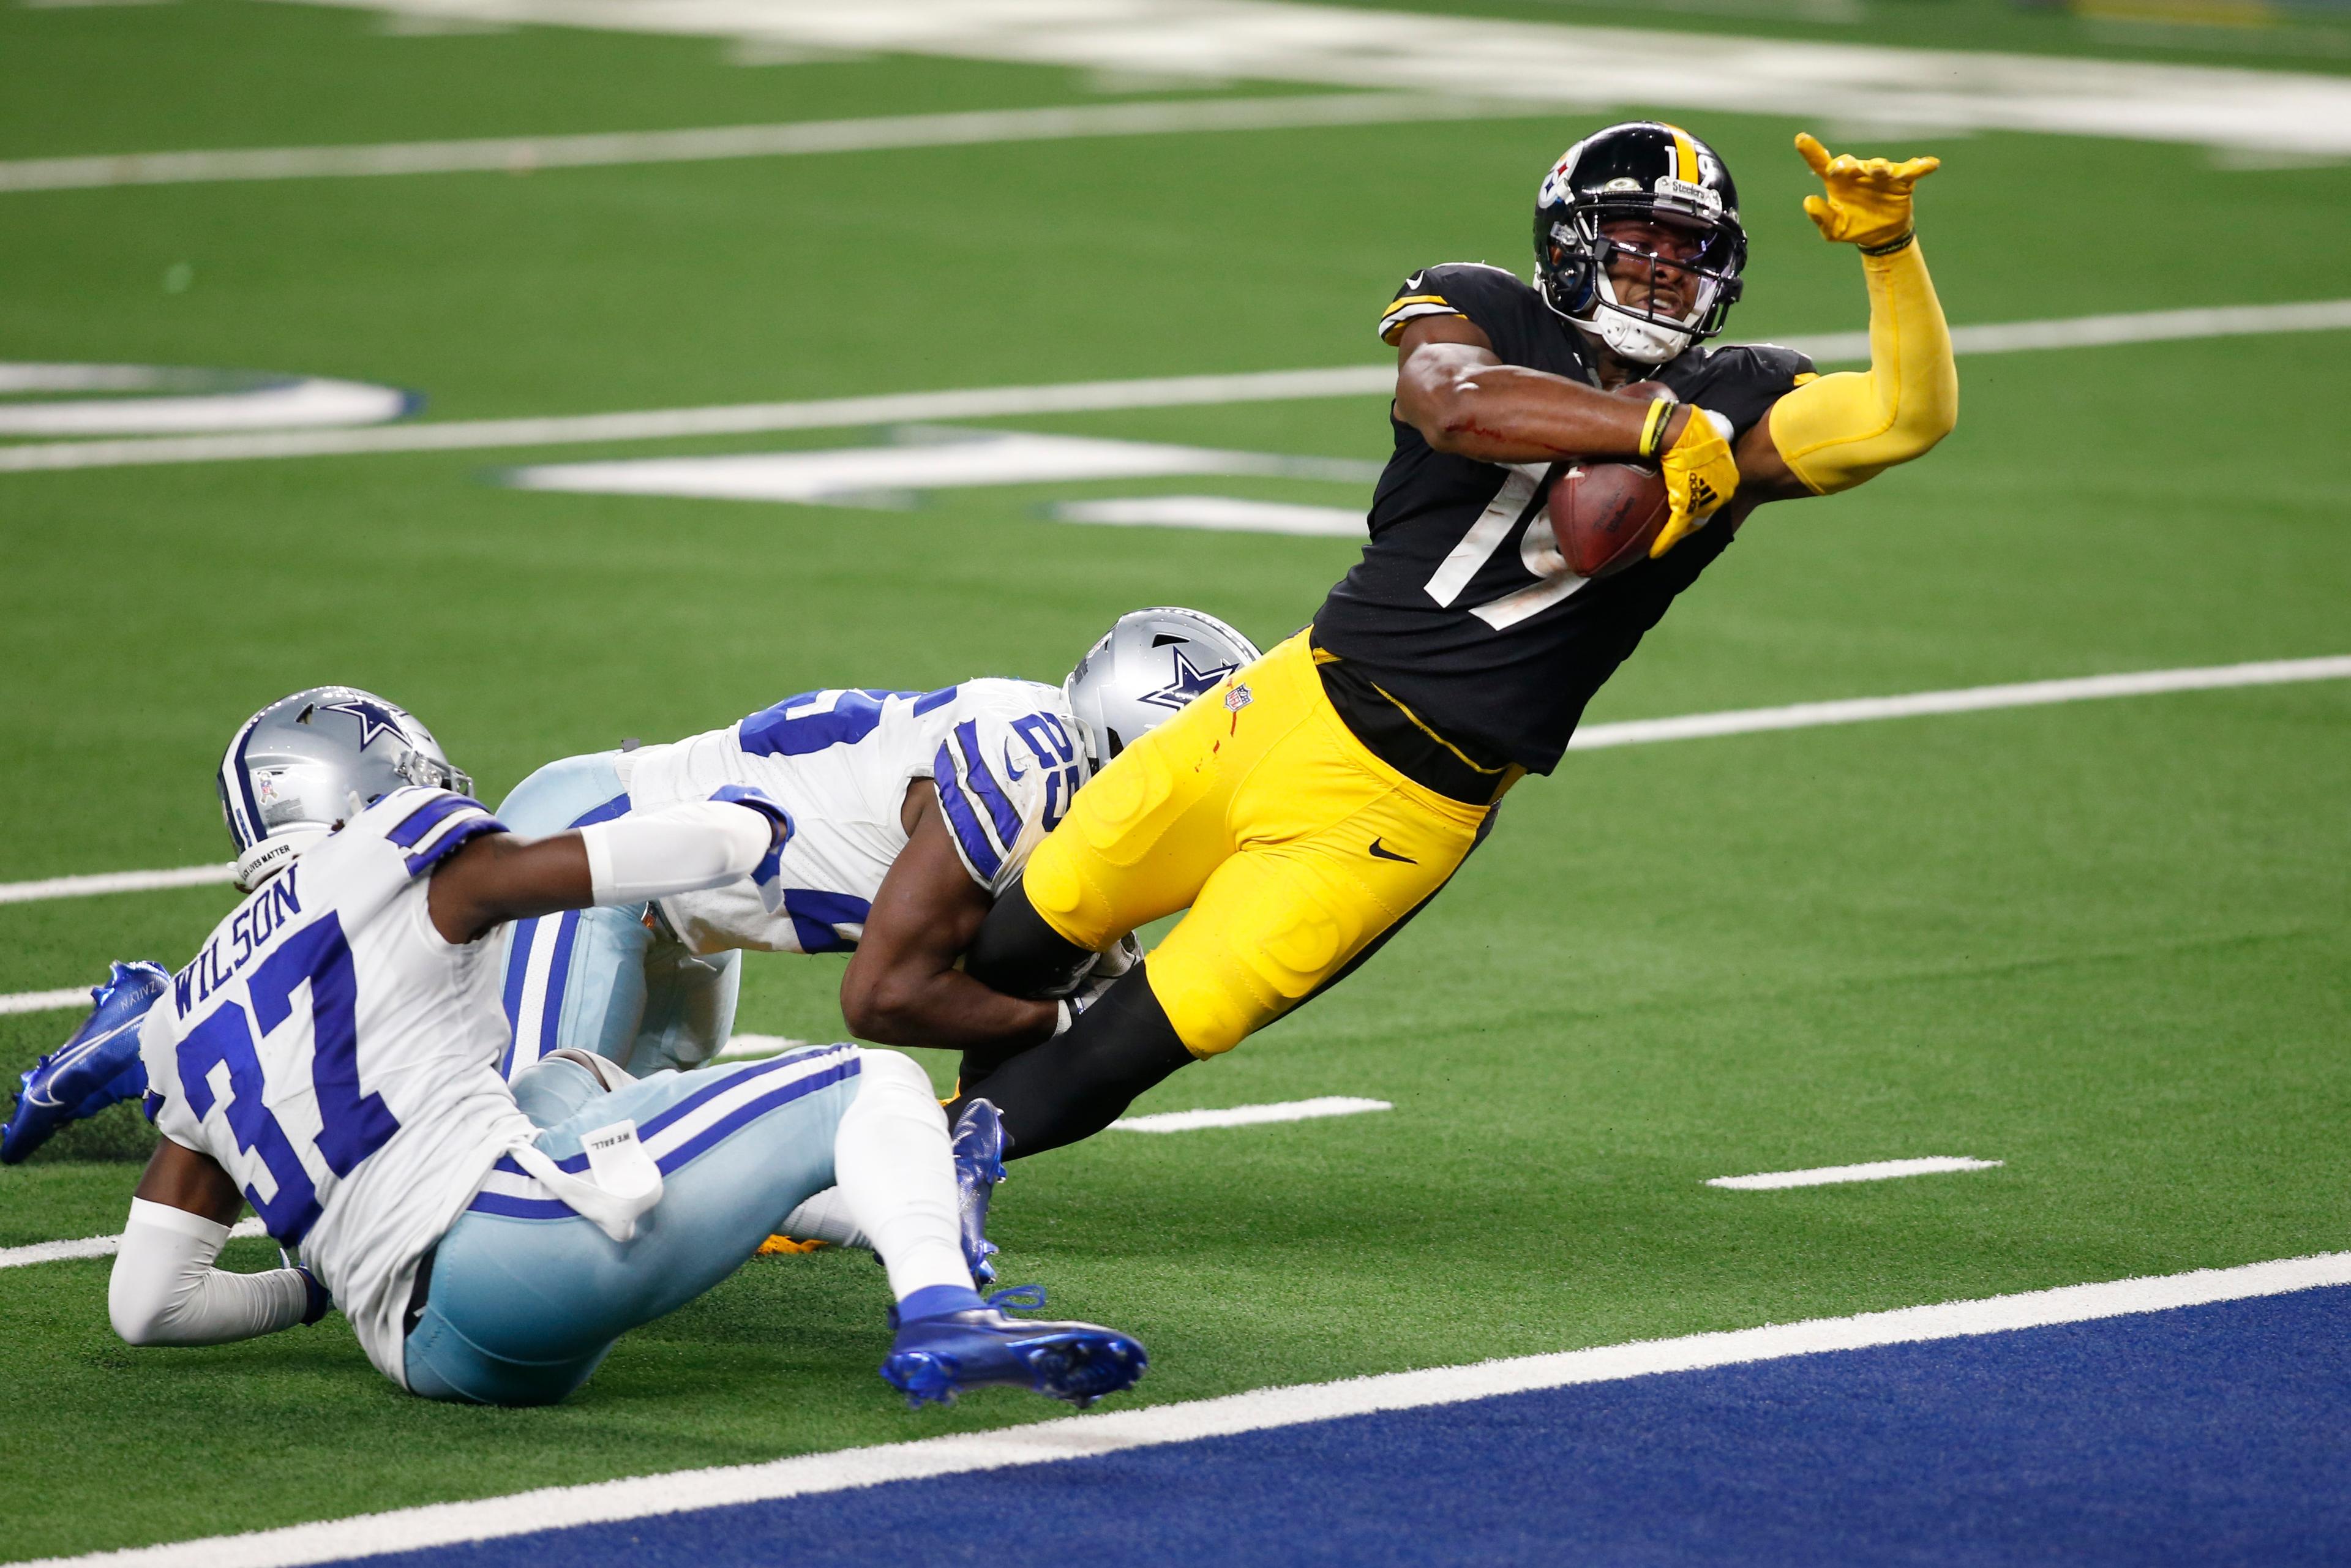 Nov 8, 2020; Arlington, Texas, USA; Pittsburgh Steelers wide receiver JuJu Smith-Schuster (19) catches a pass and runs for a touchdown against Dallas Cowboys free safety Xavier Woods (25) and safety Donovan Wilson (37) in the fourth quarter at AT&T Stadium. / © Tim Heitman-USA TODAY Sports